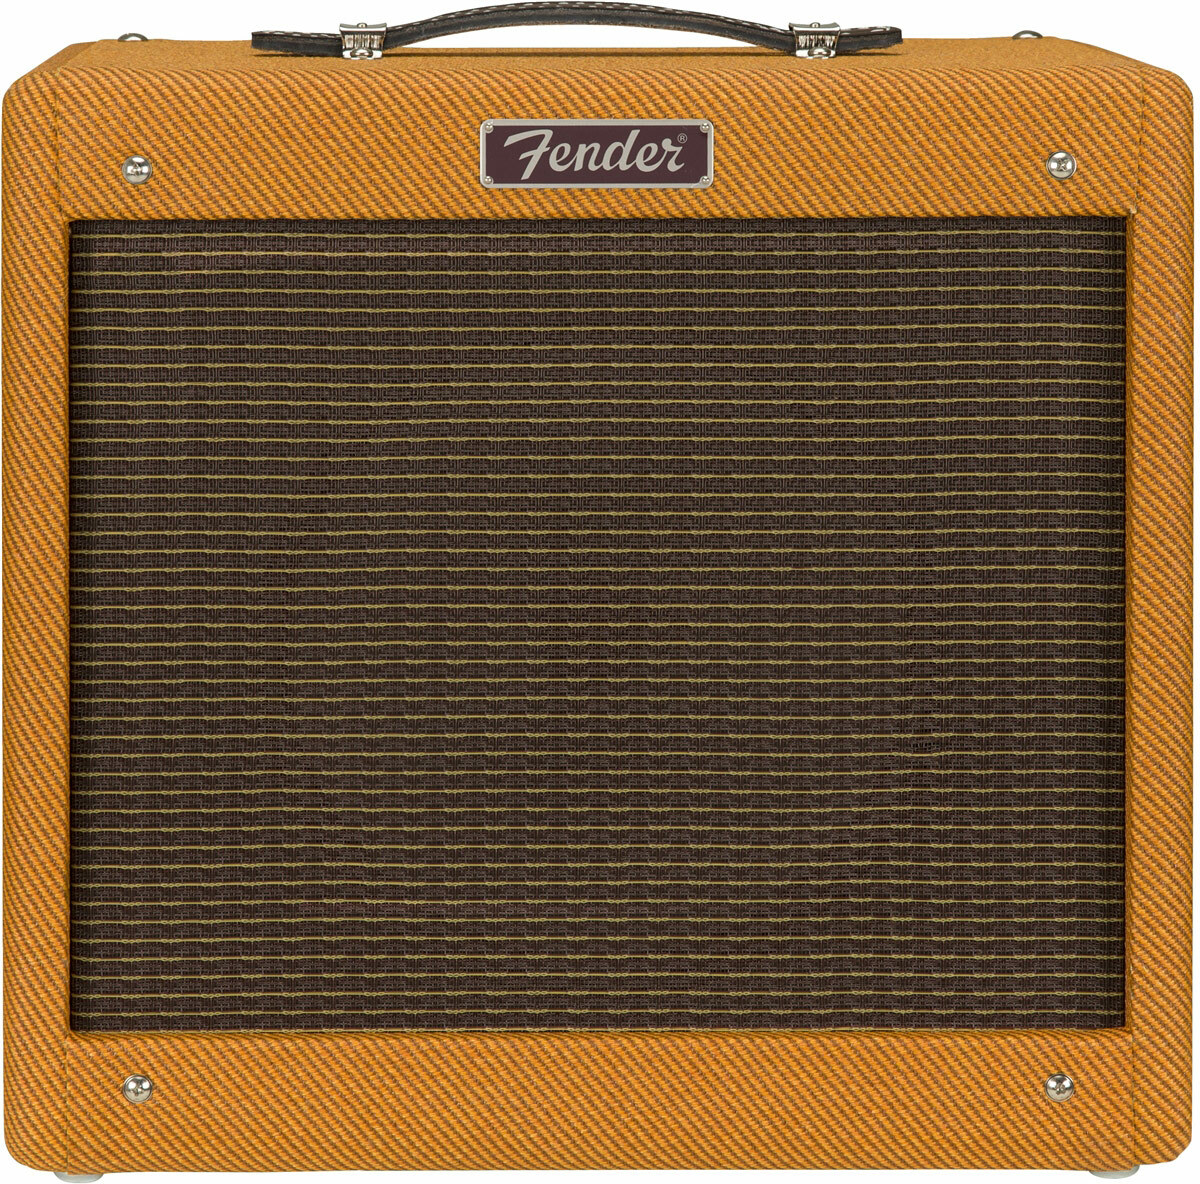 Fender Pro Junior Iv 15w 1x12 Lacquered Tweed - Electric guitar combo amp - Main picture